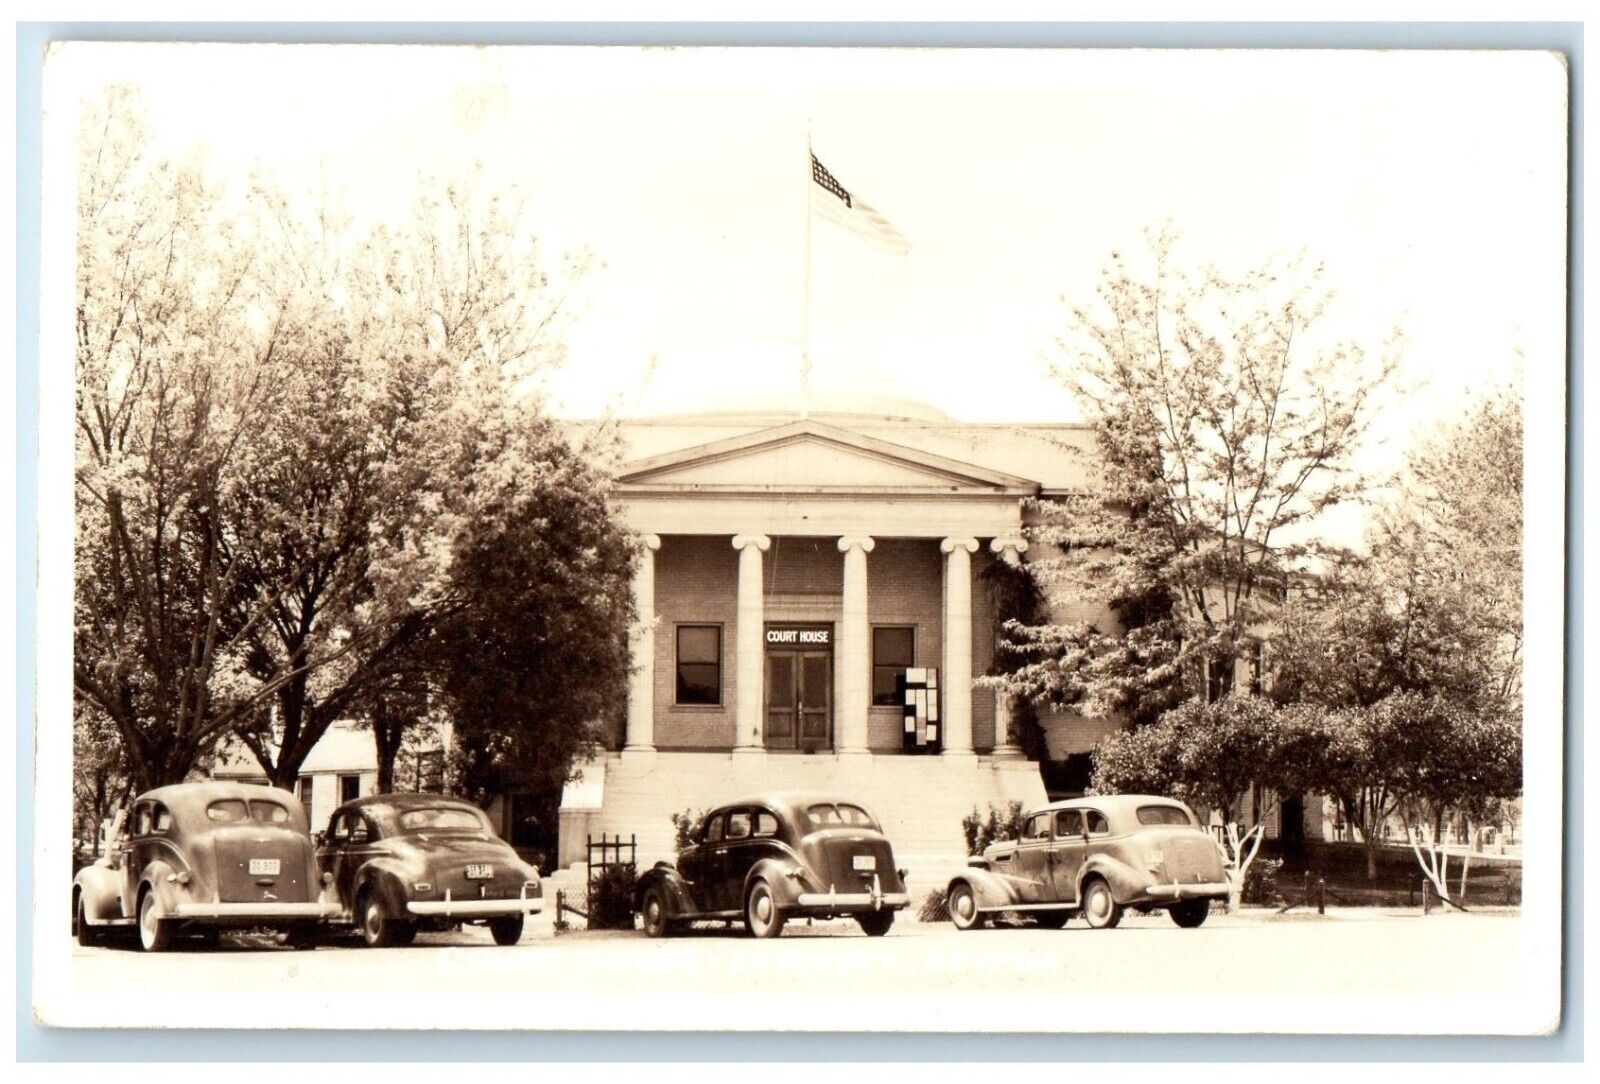 1941 Court House Cars Front Street View Fernley Nevada NV RPPC Photo Postcard